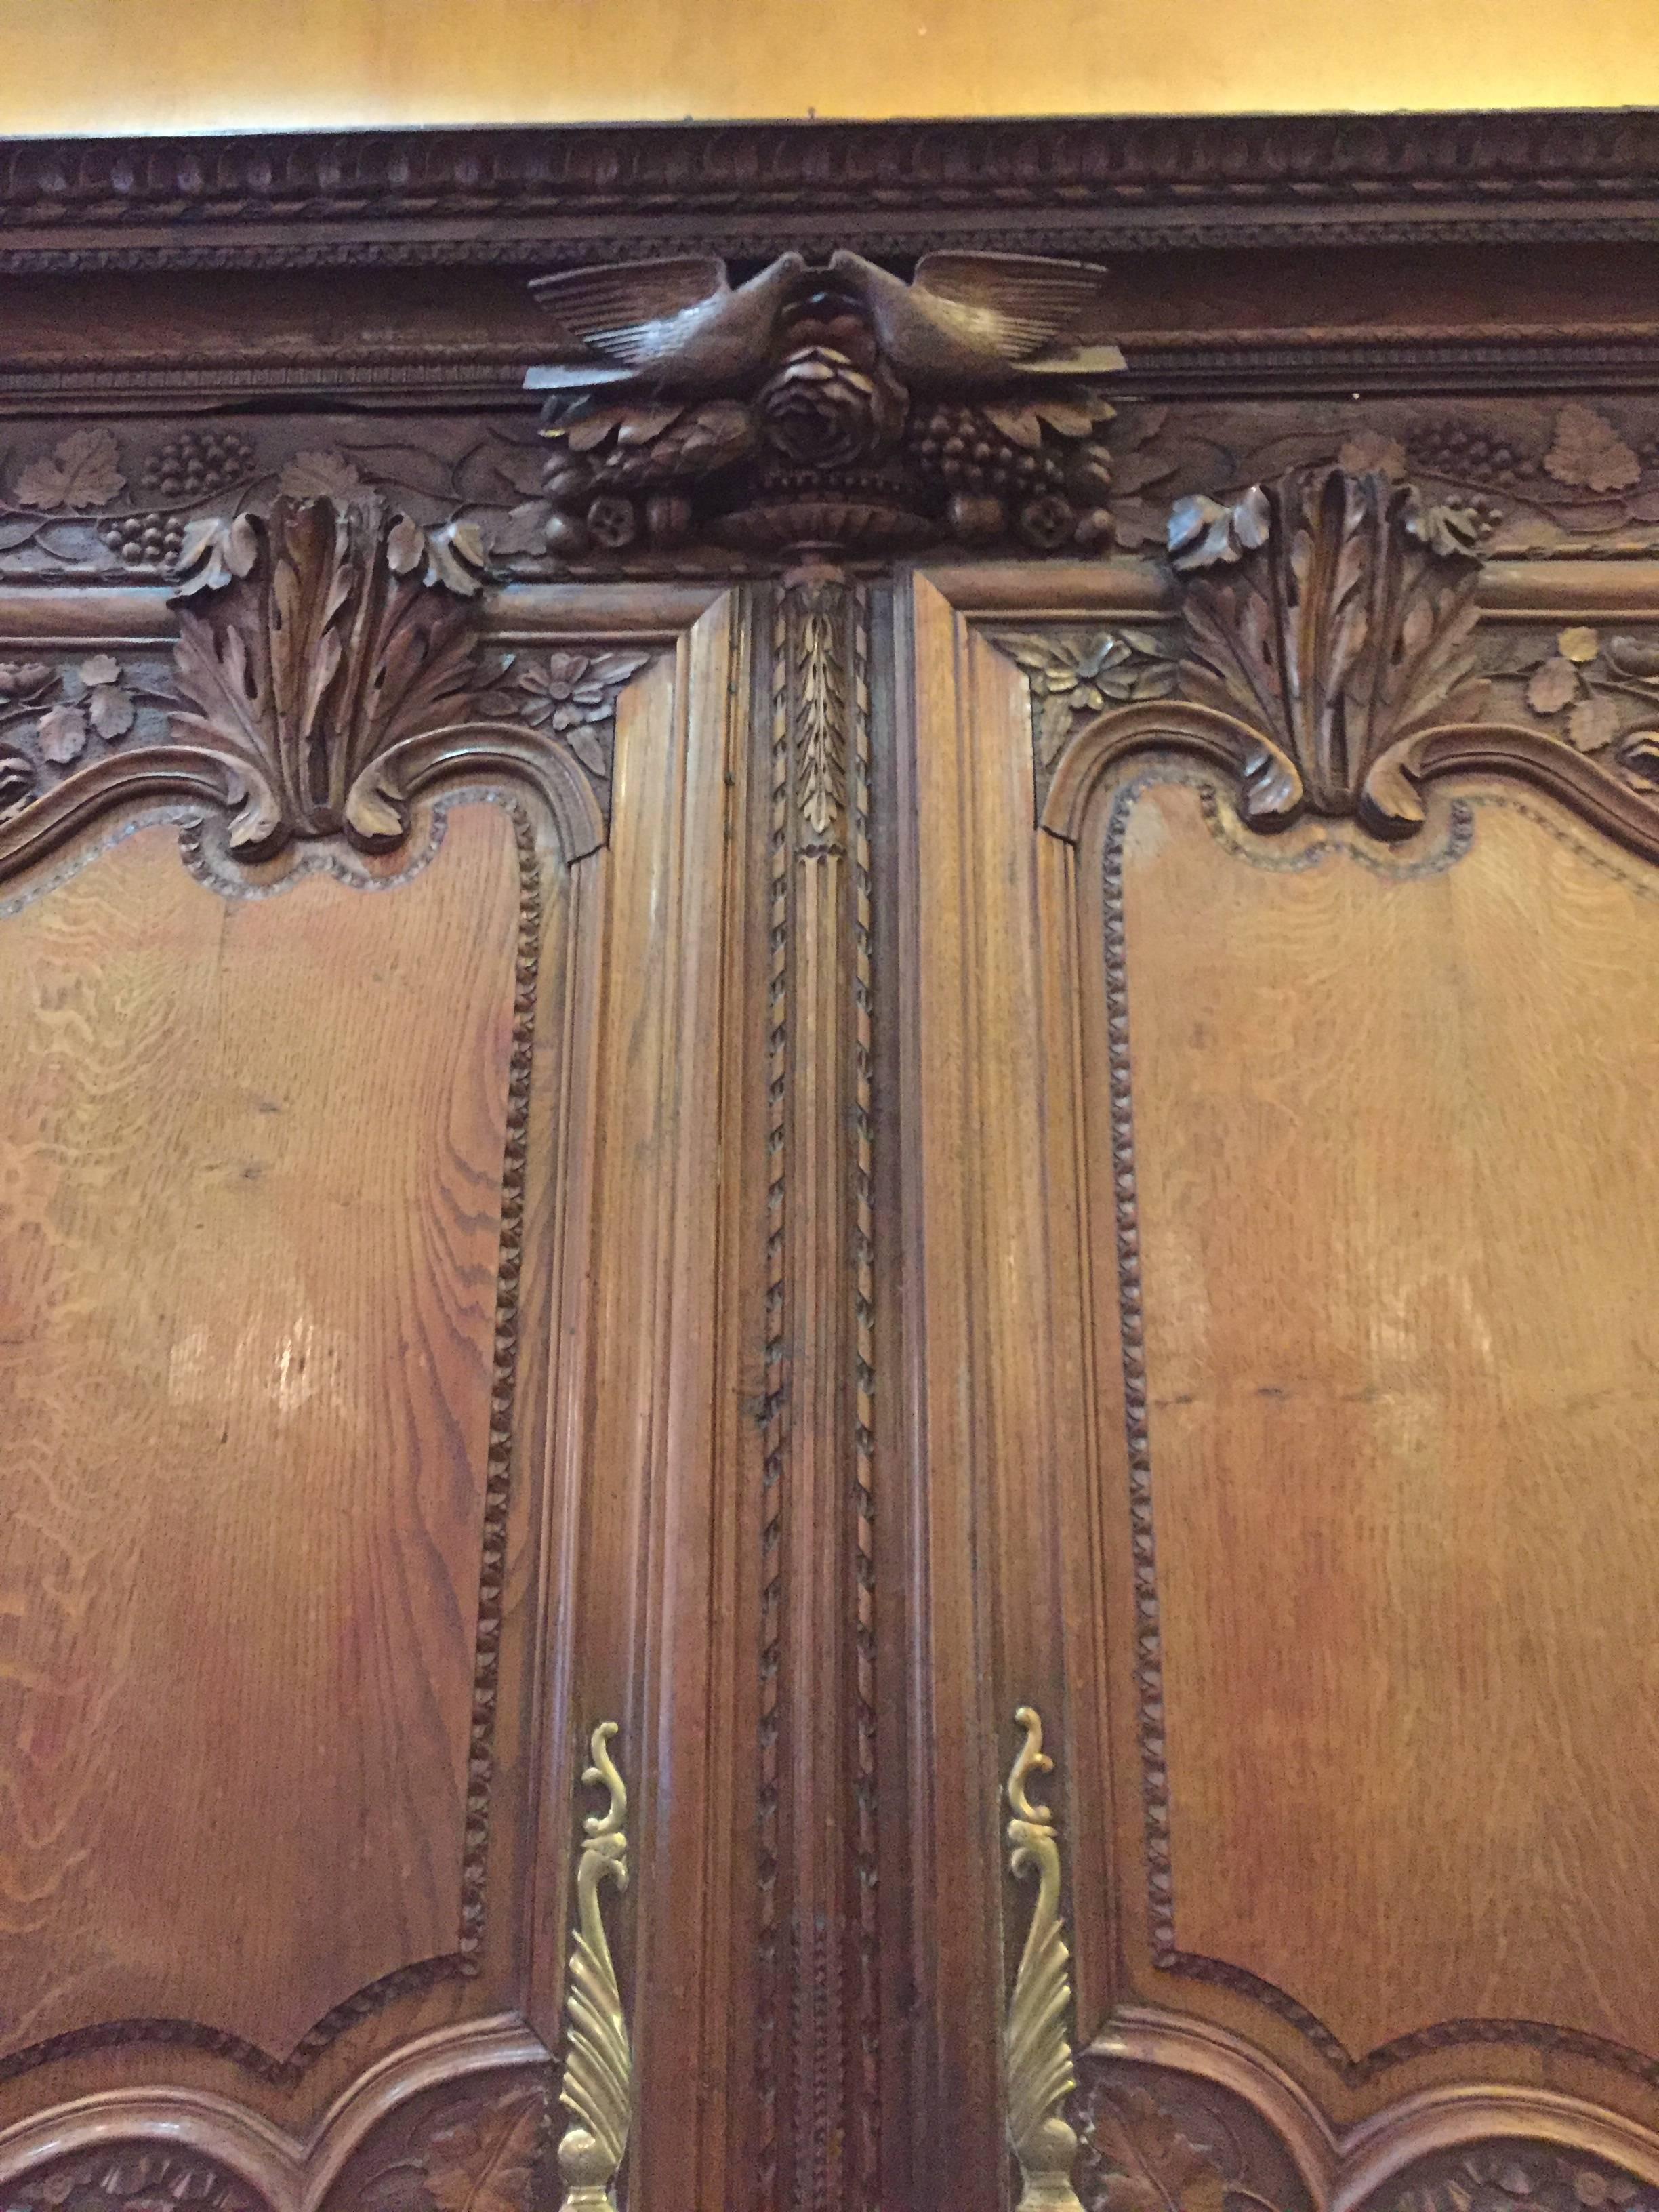 An early 19th century oak wedding armoire from Normandy, France featuring delicate carvings such as an exceptional pair of lovebirds on the top crest. The armoire opens to reveal three shelves and two locking drawers for storage.